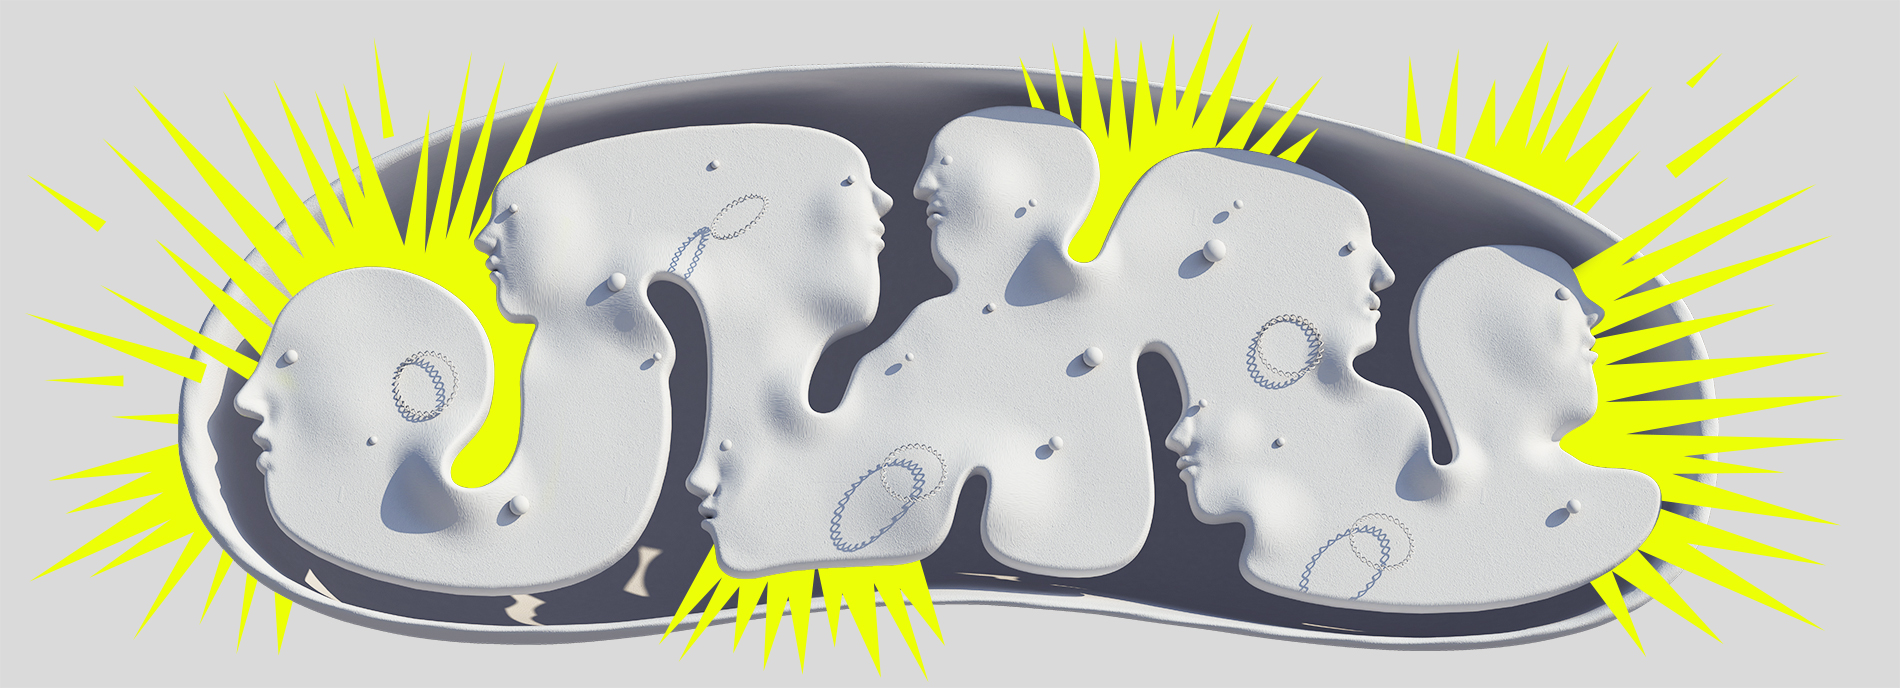 Stylized illustration combines flat color and 3D forms make up a mitochondria with human heads inside it.